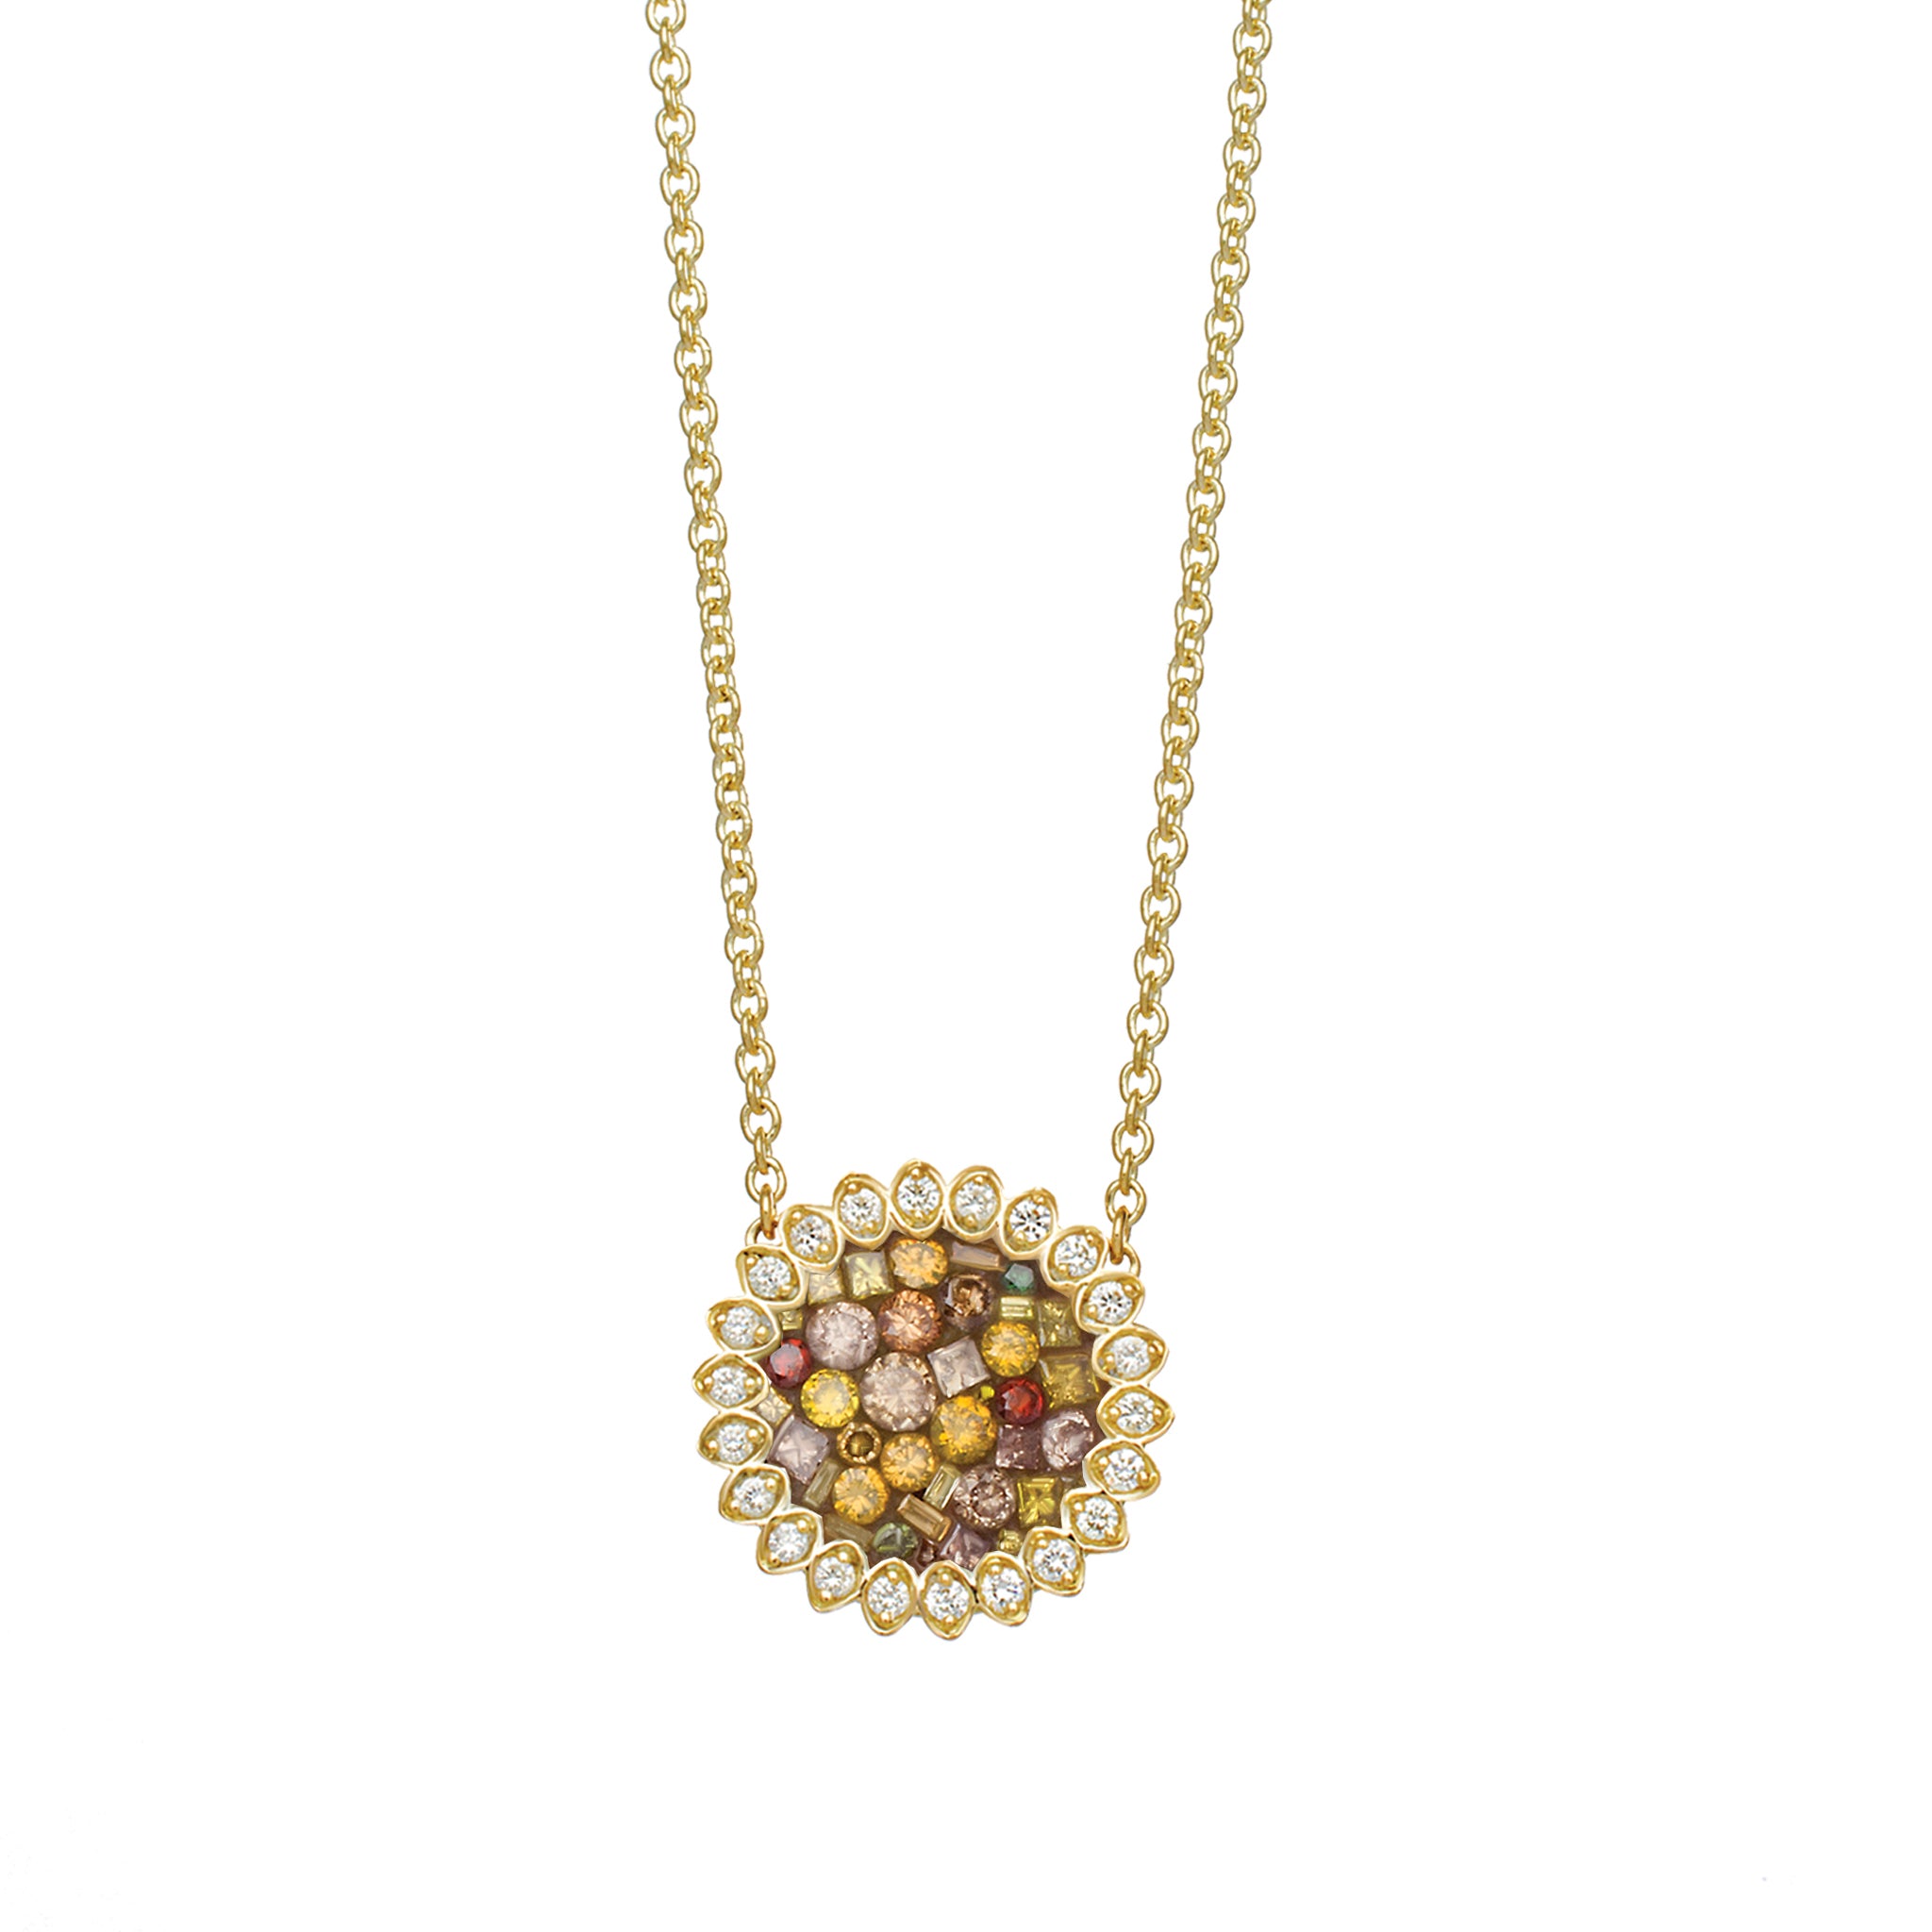 Bloomingdale's Diamond Sunflower Pendant Necklace in 14K Yellow Gold, 0.10  ct. t.w. - 100% Exclusive | Bloomingdale's